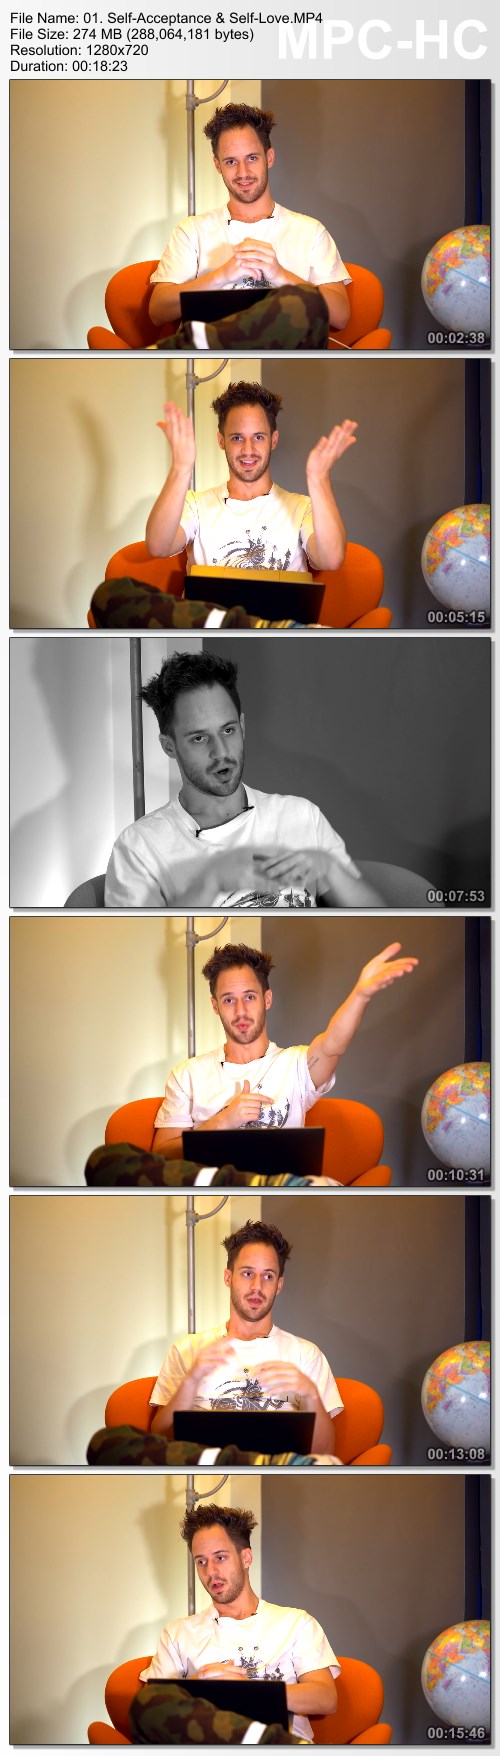 Transformation Mastery by Julien Blanc (Months 1-6)